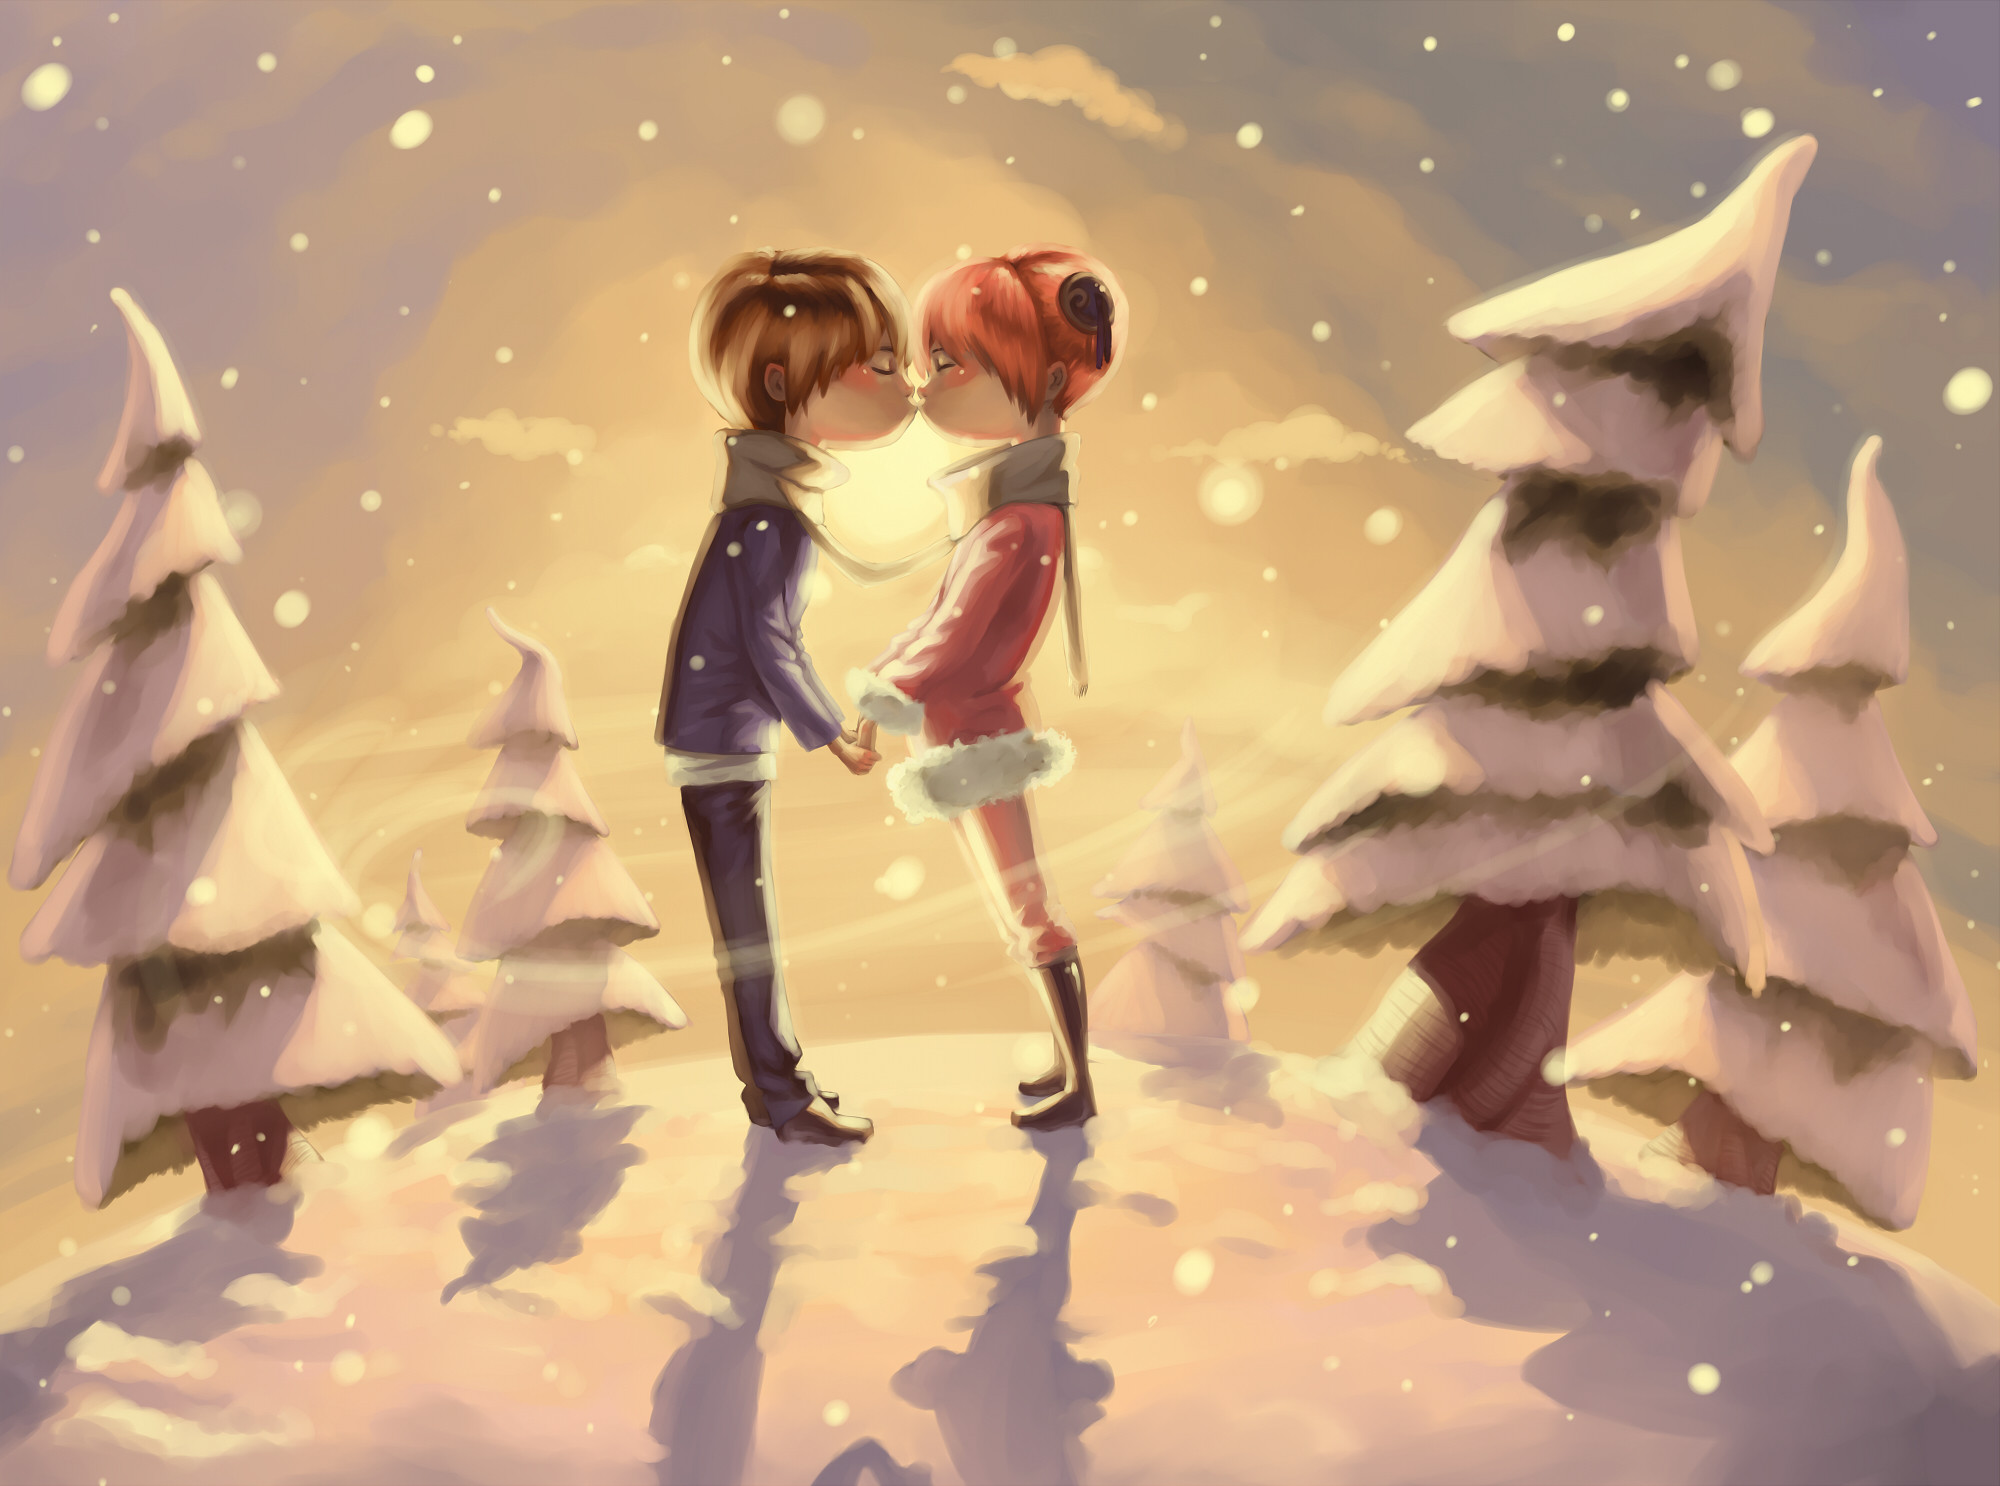 2000x1486 Winter Couple Romantic Kiss In Pine Forest Cartoon